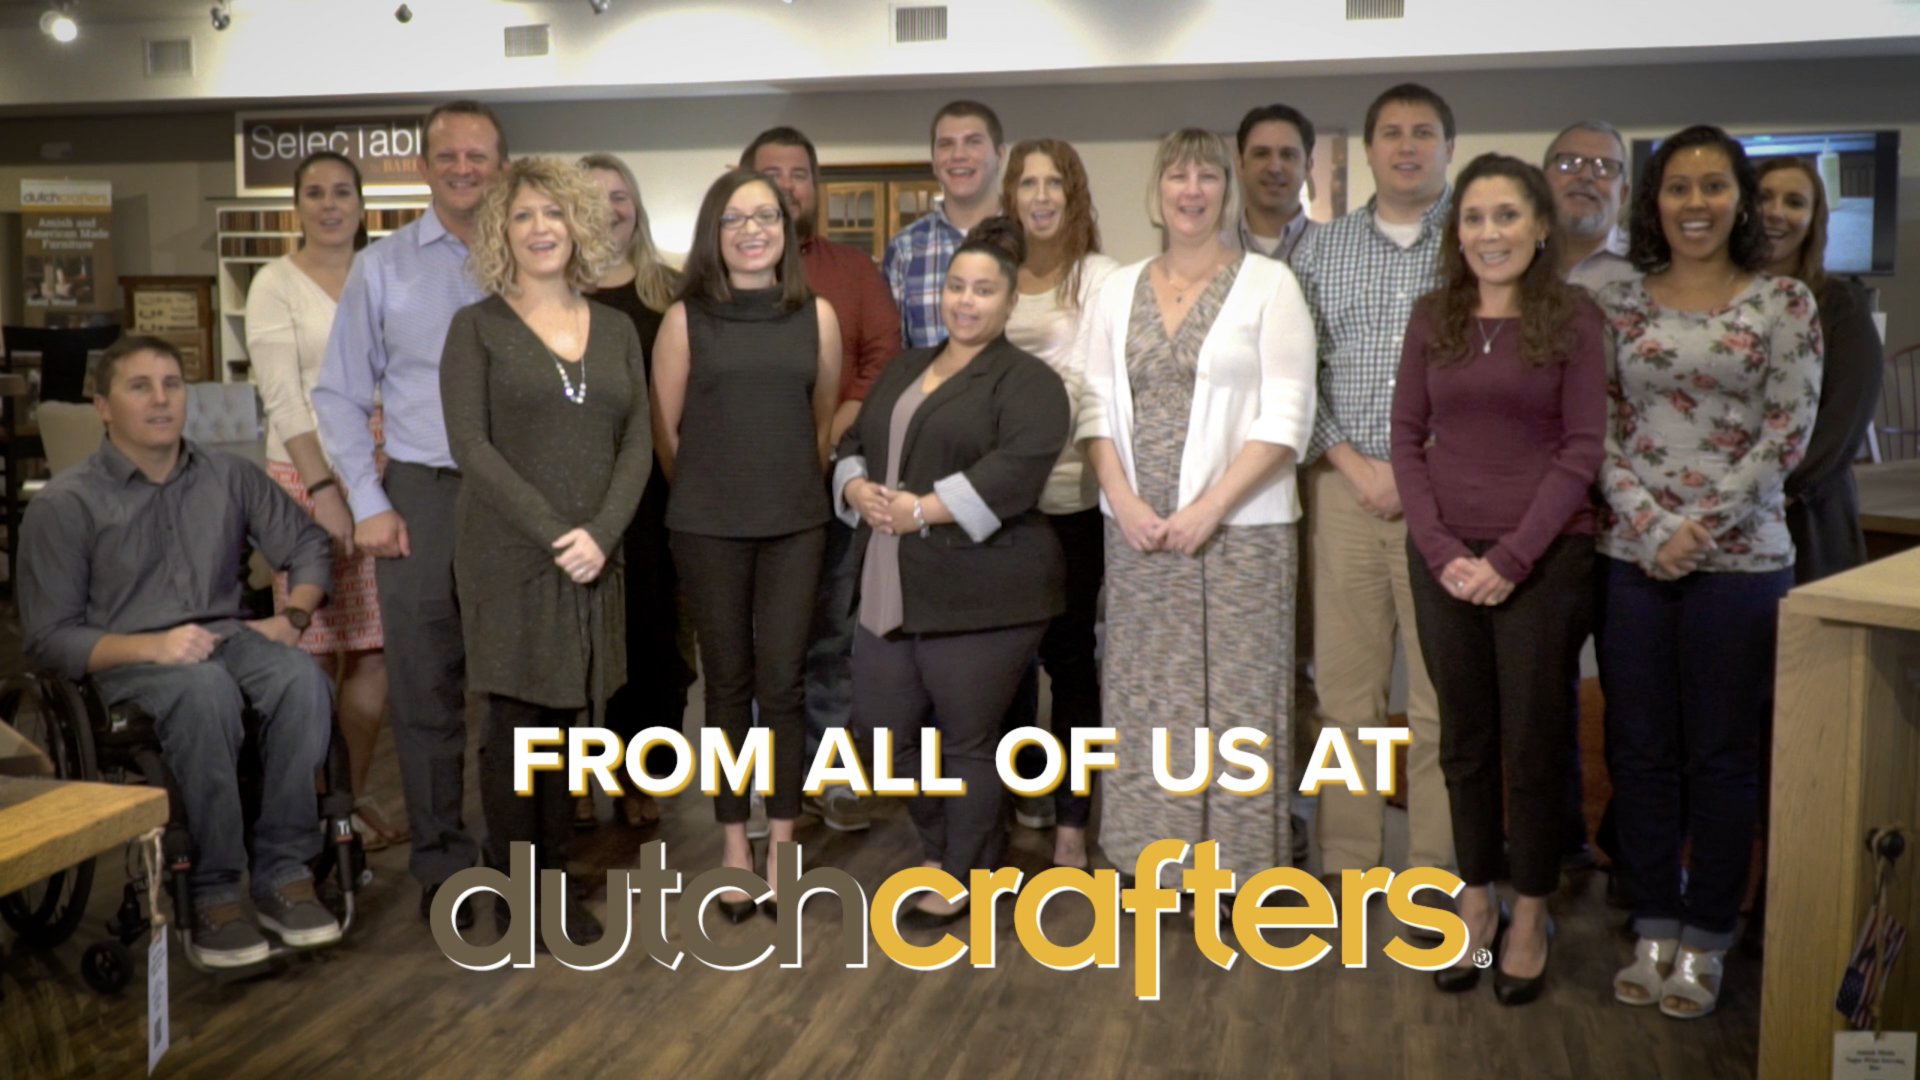 happy holidays from dutchcrafters